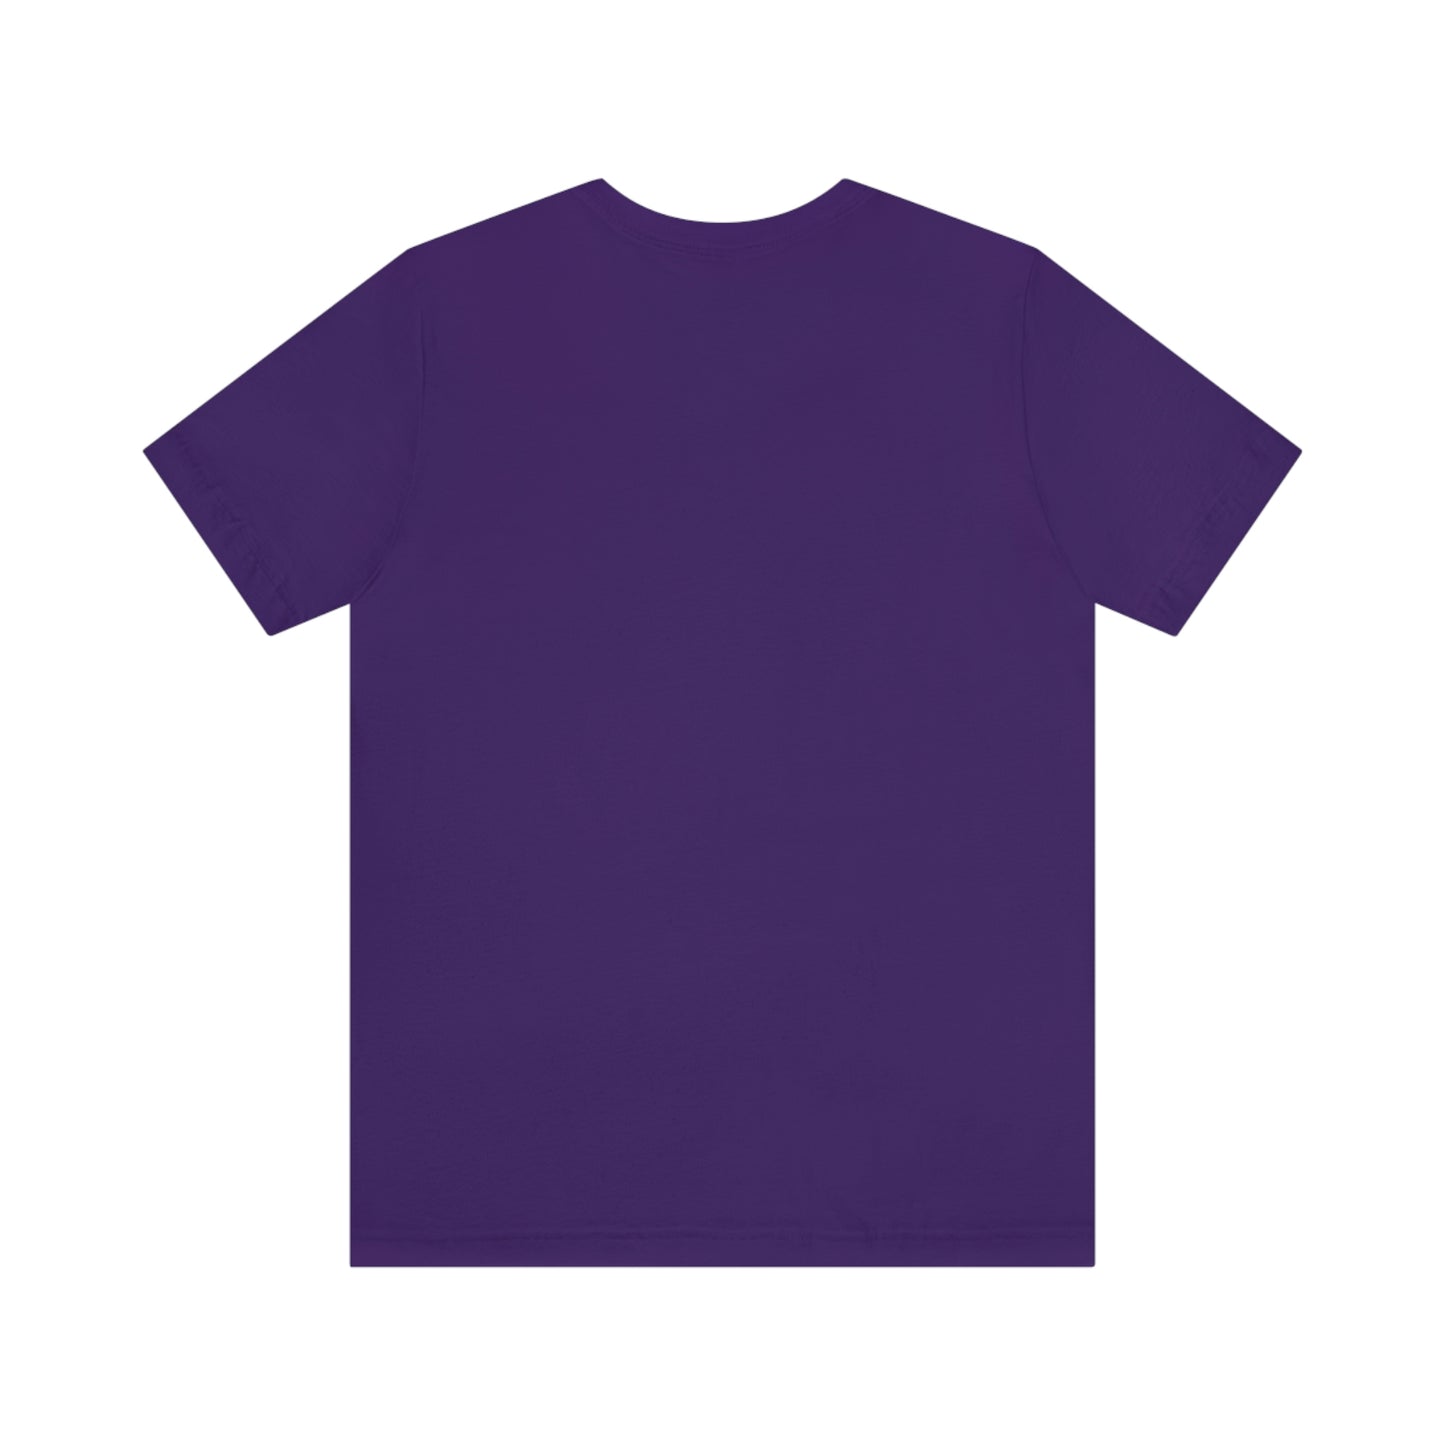 FLYING BOOMERANG  - Purple T-Shirt plain back. Taken from the TEQNEON Radioactive collection.